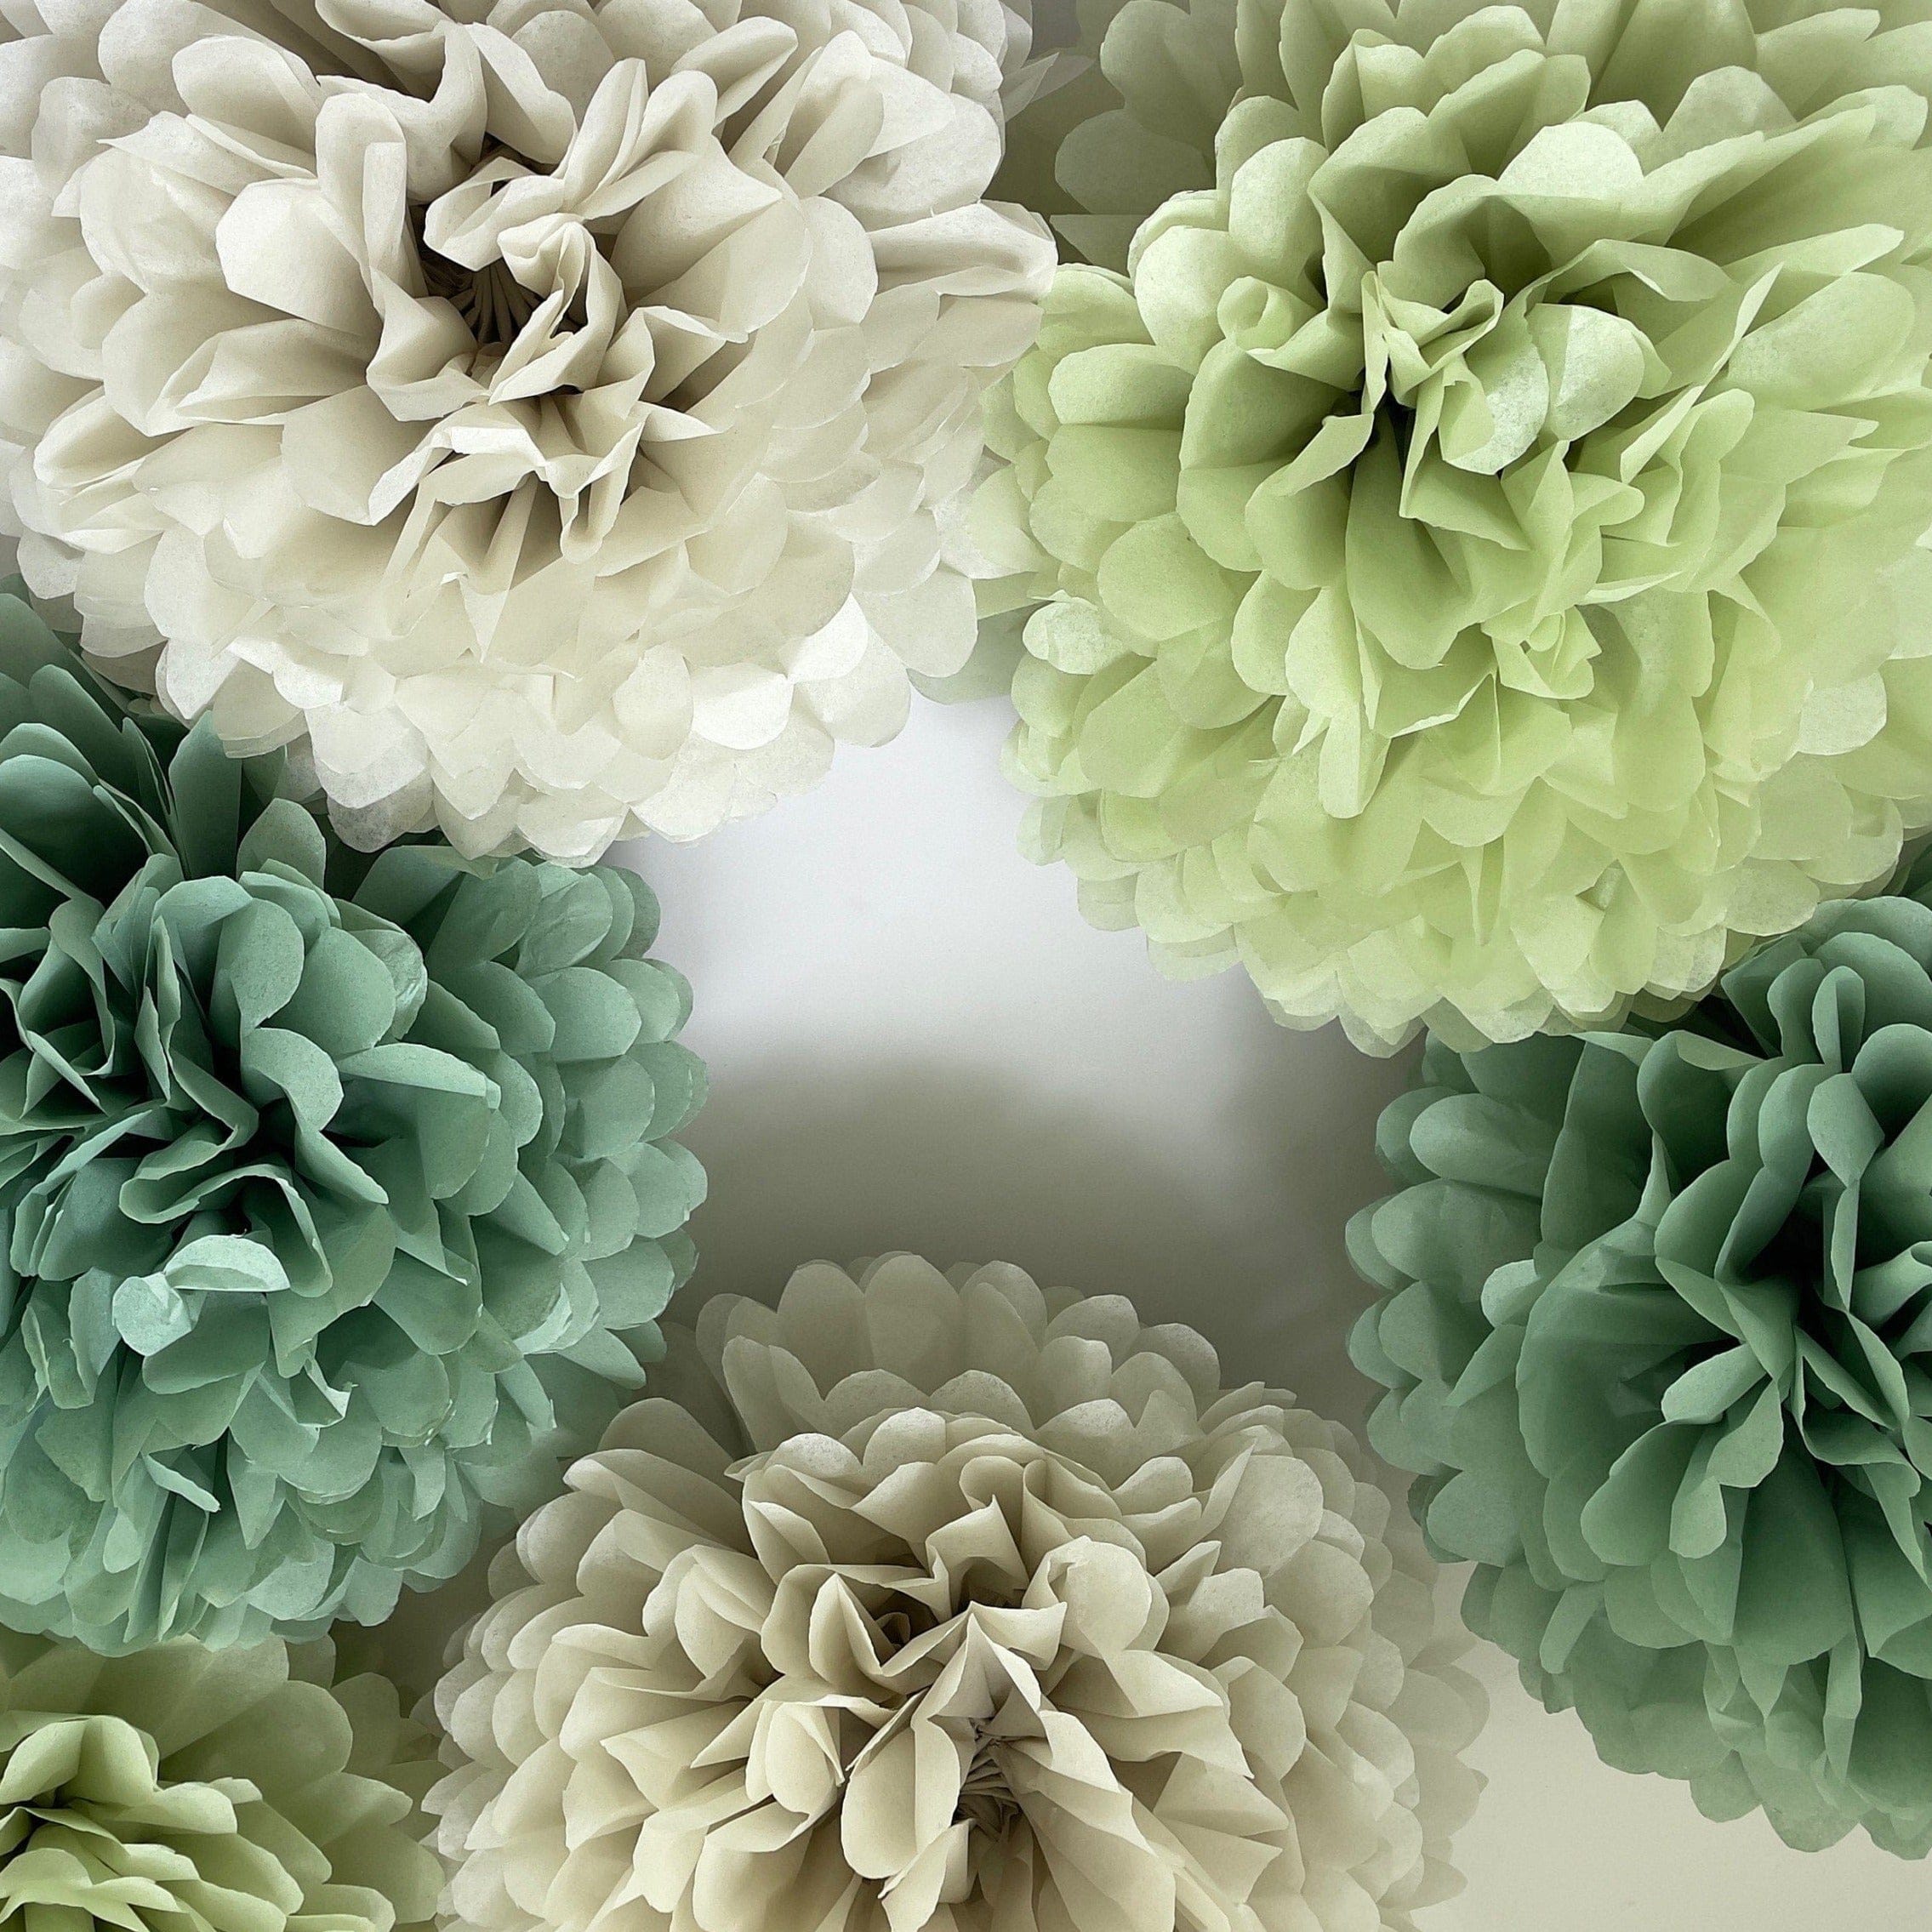 sage green Tissue paper pom poms, dusty green Paper flowers